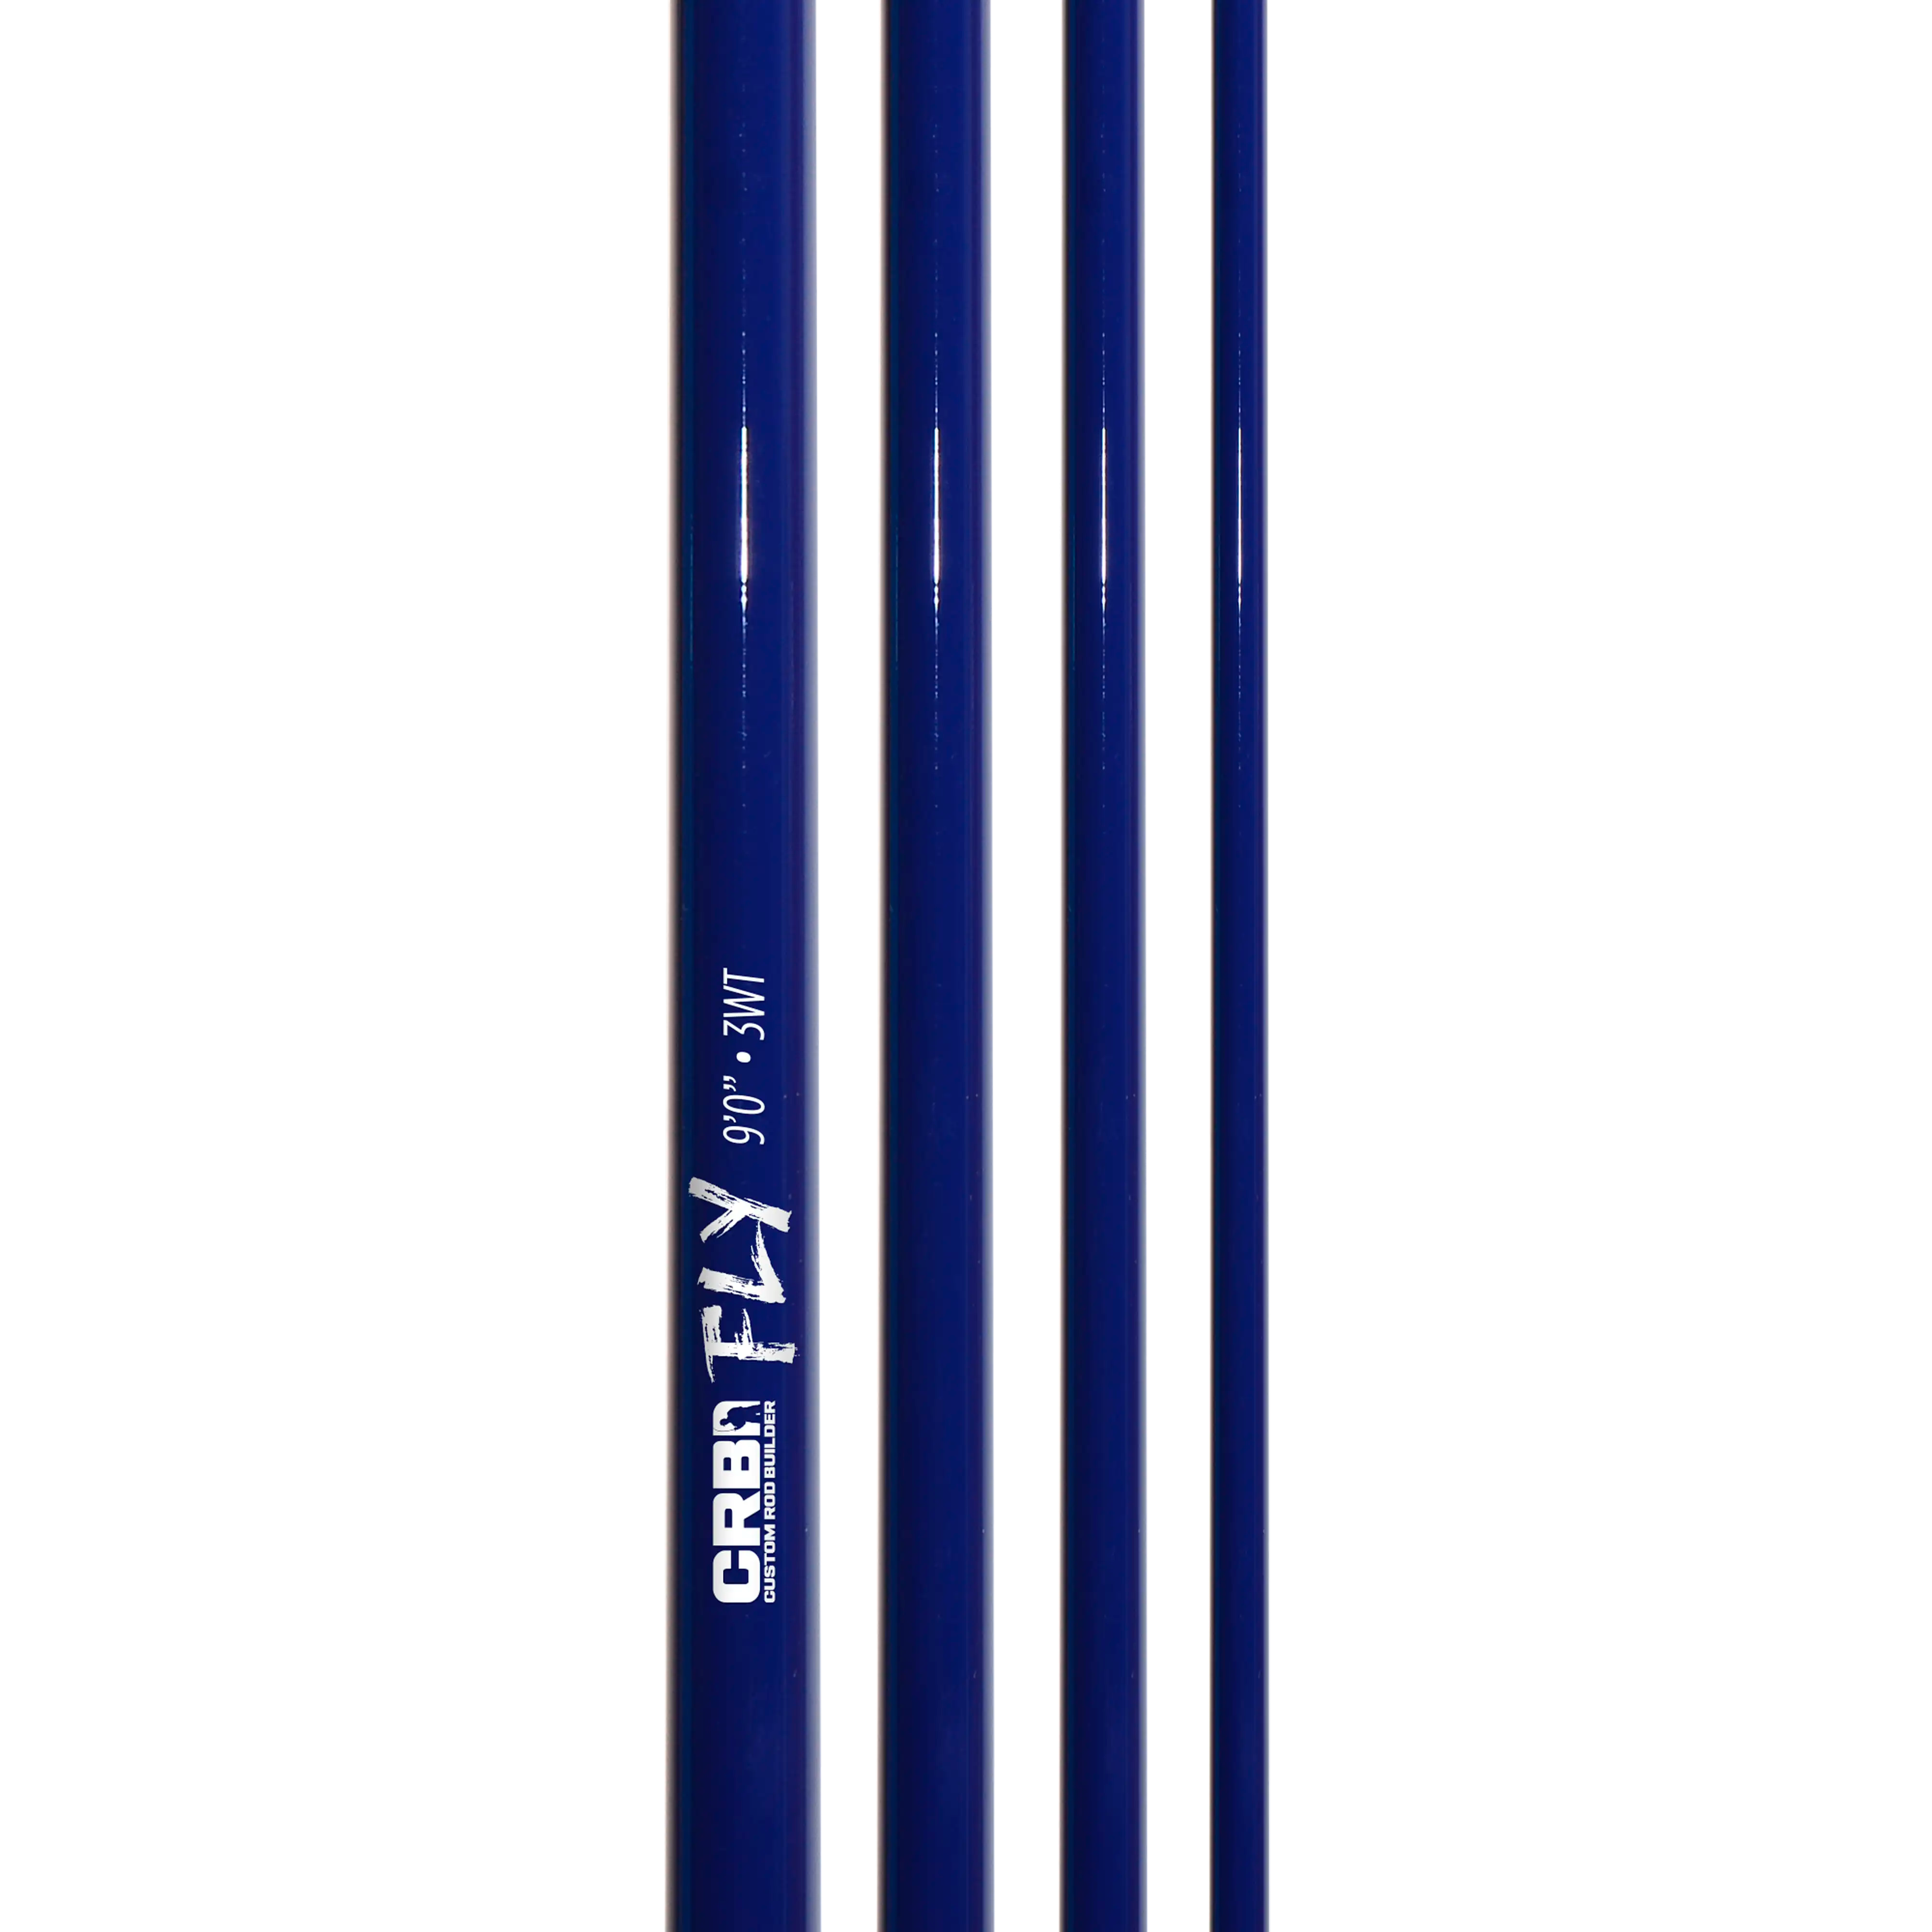 Color Series Fly Rod Blanks, ICF908-4 / 9'0 / 8 wt. / 4pc / Navy Blue